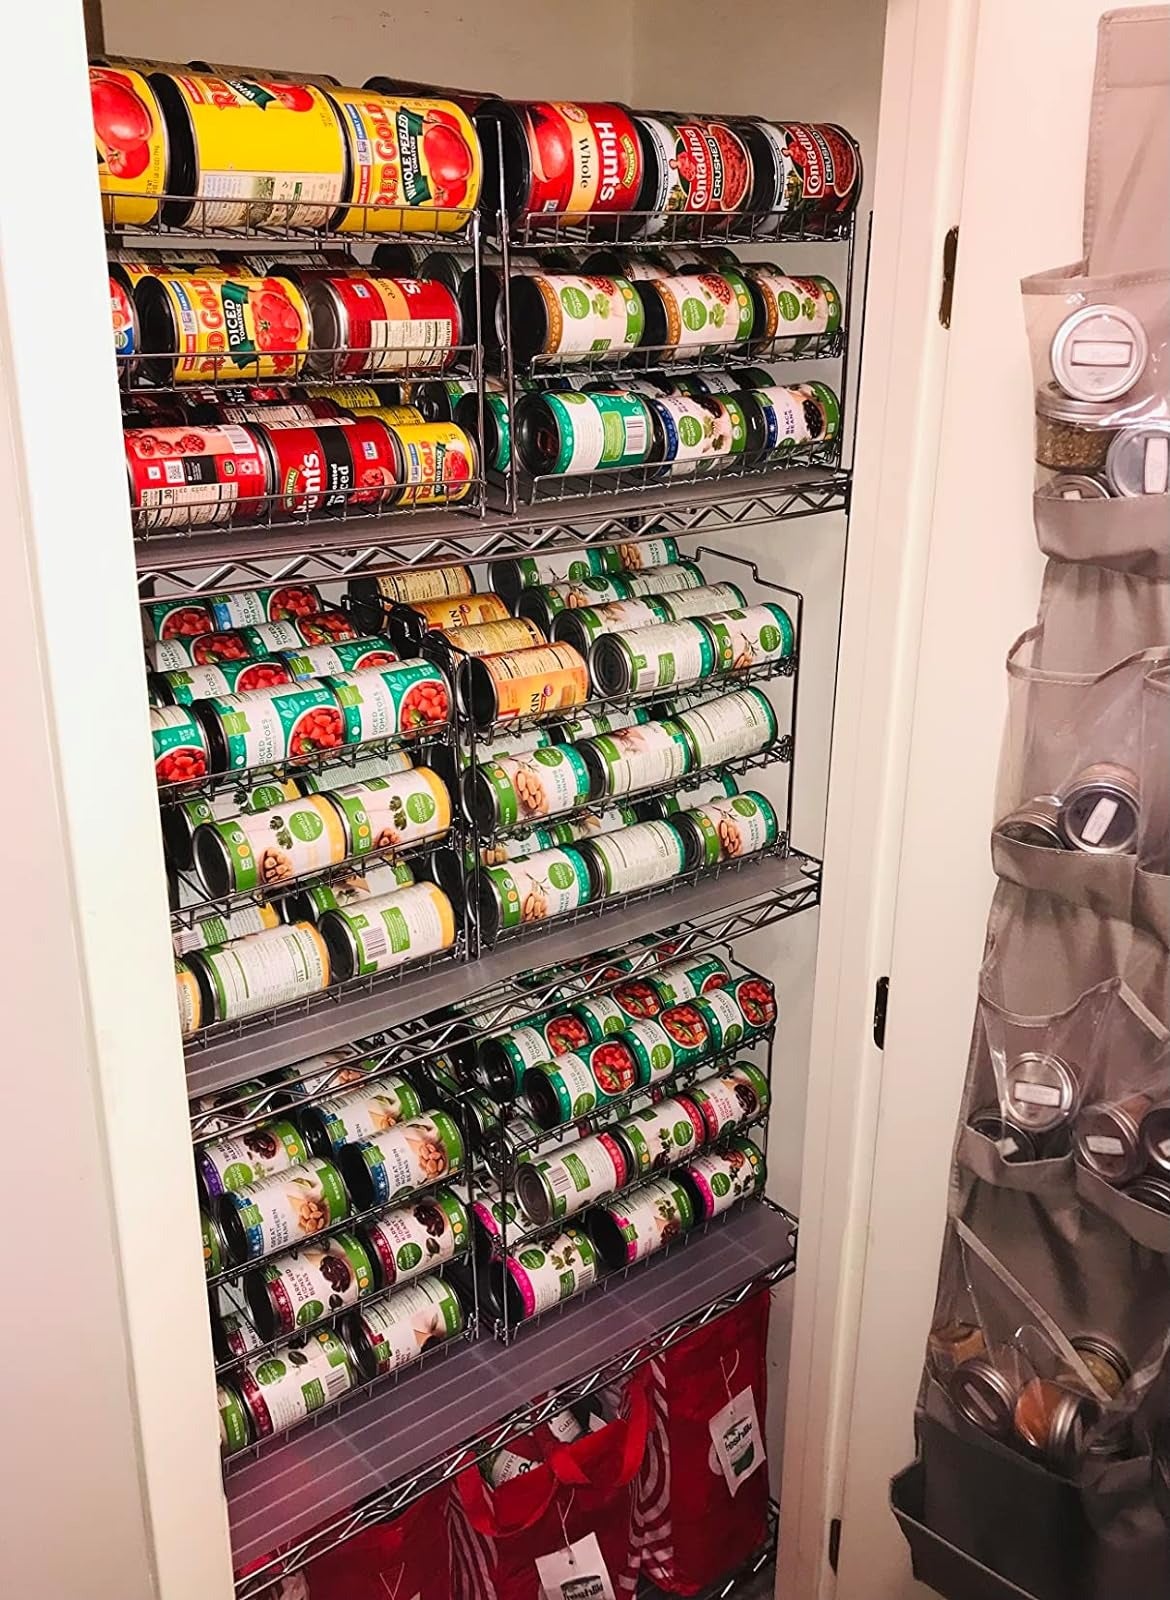 Organized pantry shelves with various canned goods on the rack